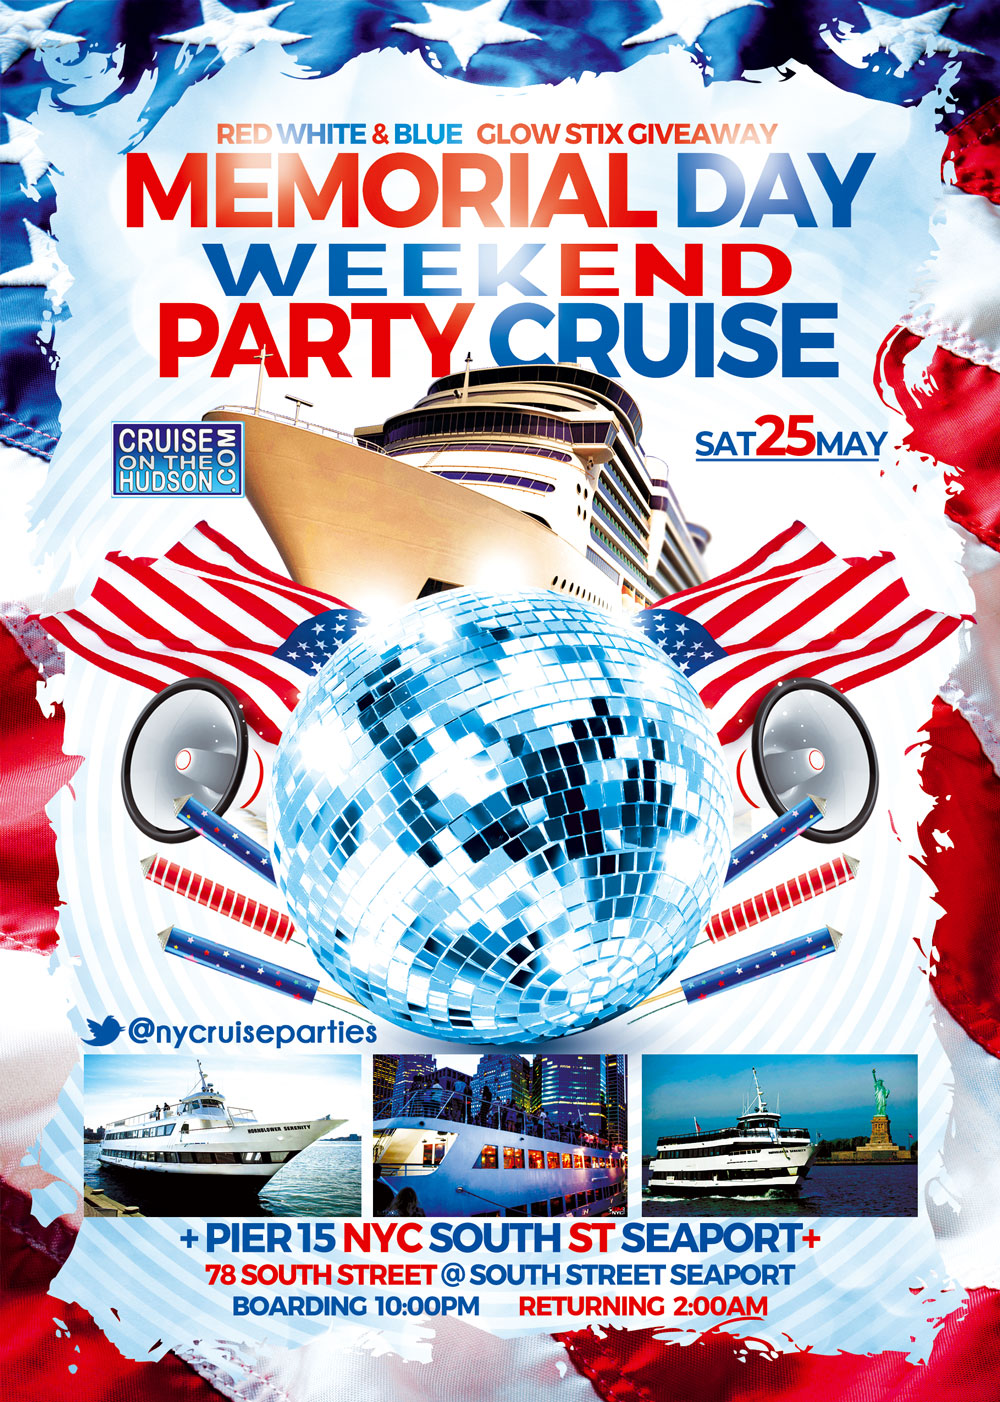 Memorial Day Weekend Party Dance Cruise Hornblower Serenity Yacht NYC at Pier 15 NYC Flyer